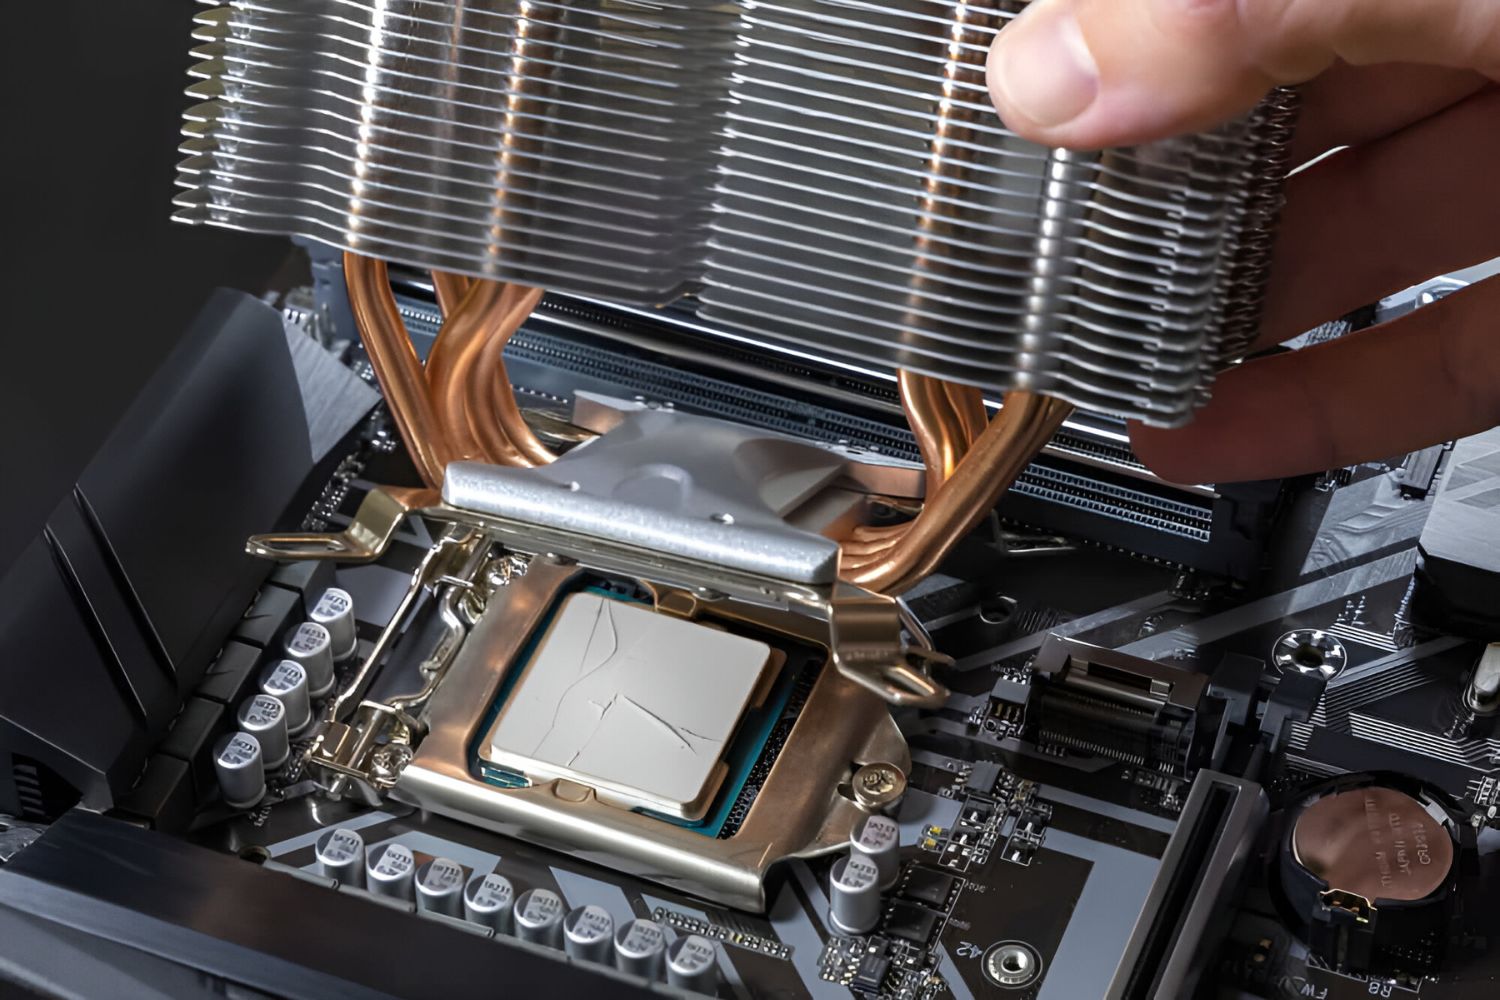 How To Tell If A CPU Cooler Is Compatible With The Motherboard